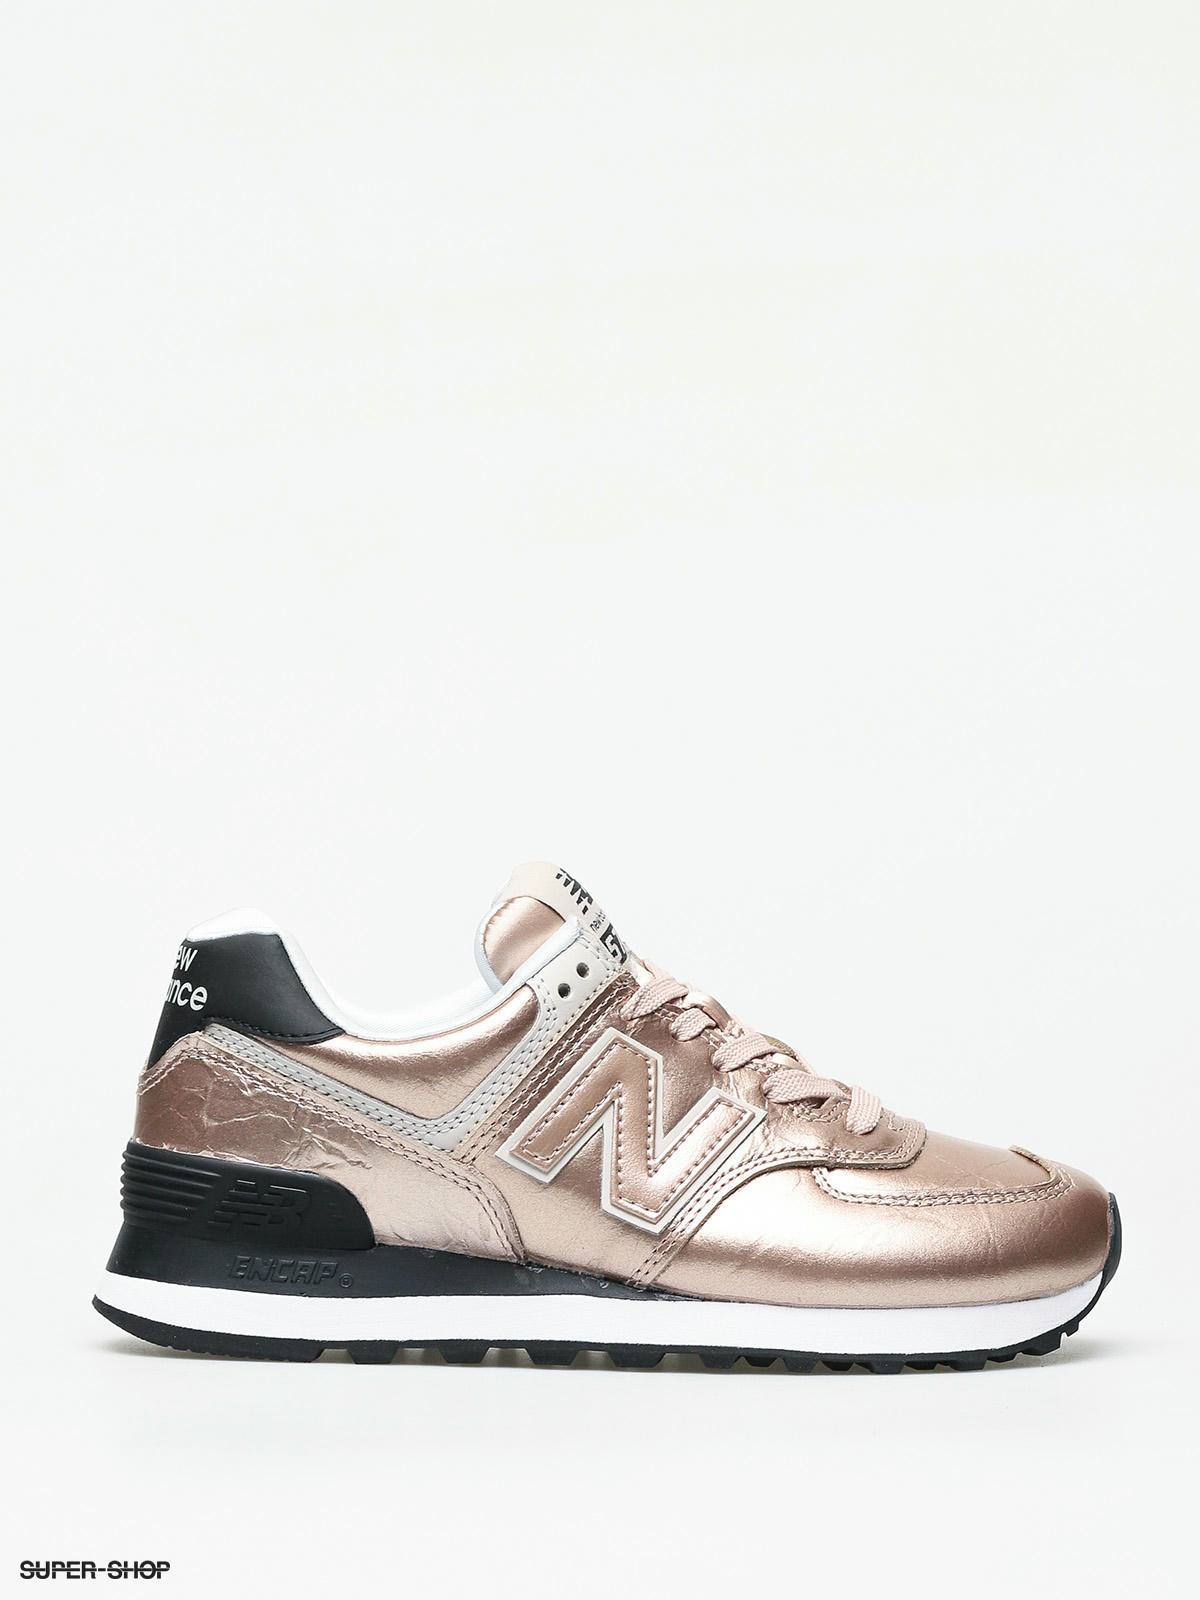 New Balance 574 Shoes Wmn (rose gold)